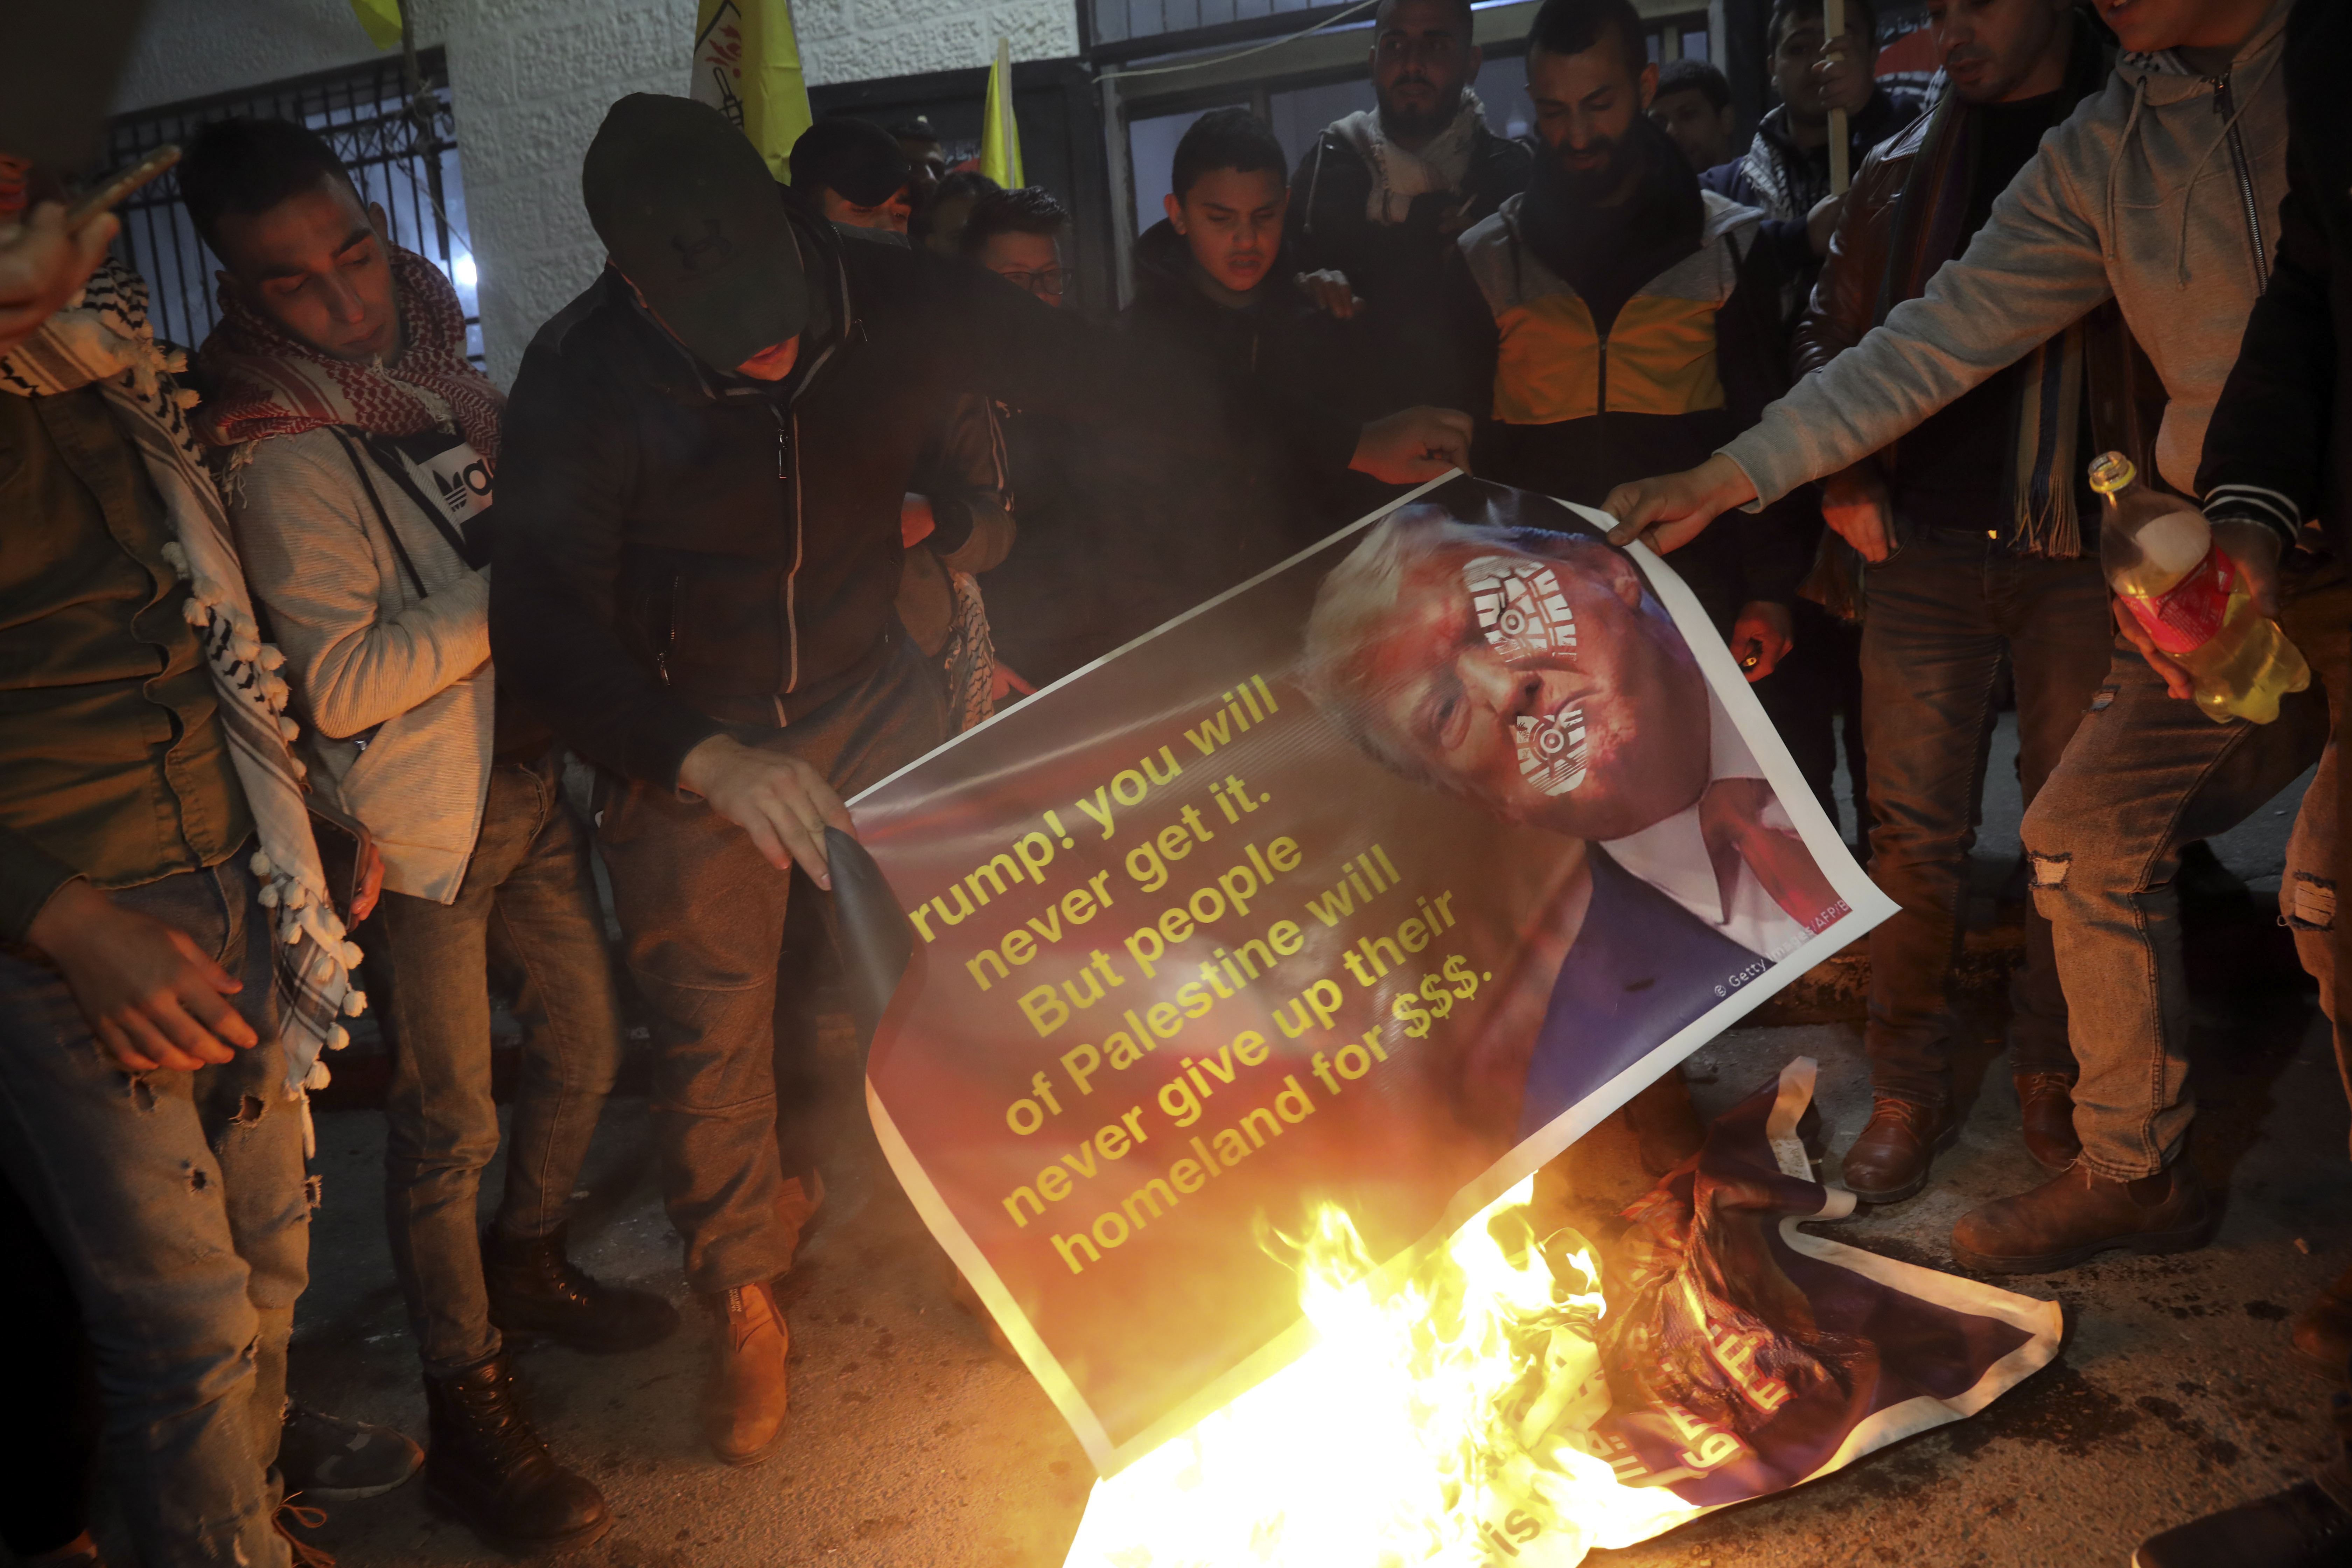 Palestinian burn a poster showing U.S. President Donald Trump as they protest the American peace plan in Bethlehem, Monday, Jan. 27, 2020. Israeli Prime Minister Benjamin Netanyahu arrived in Washington Sunday night vowing to 